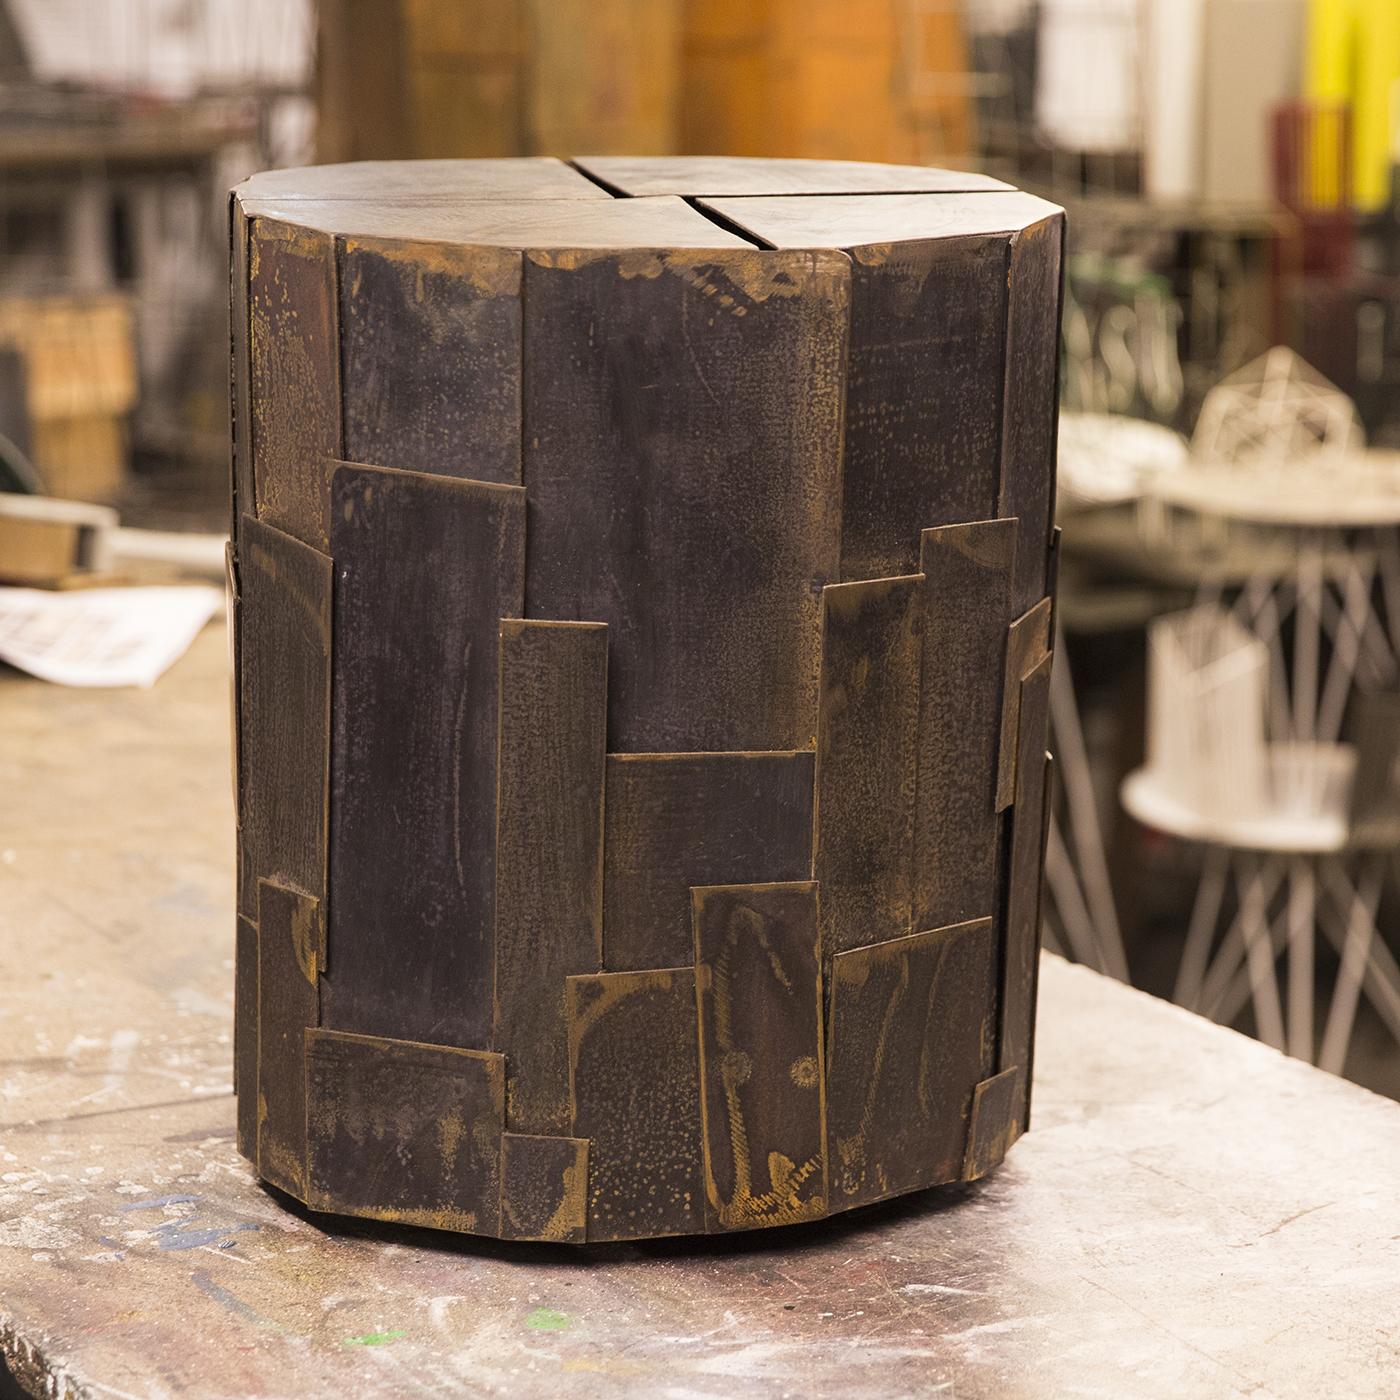 Sculptural side table in treated iron sheet by Sciortino. The metalwork is painted black, with a rough finish that lends the work an air of industrial. Measurements and finish may vary slightly due to the artistic nature of Sciortino's